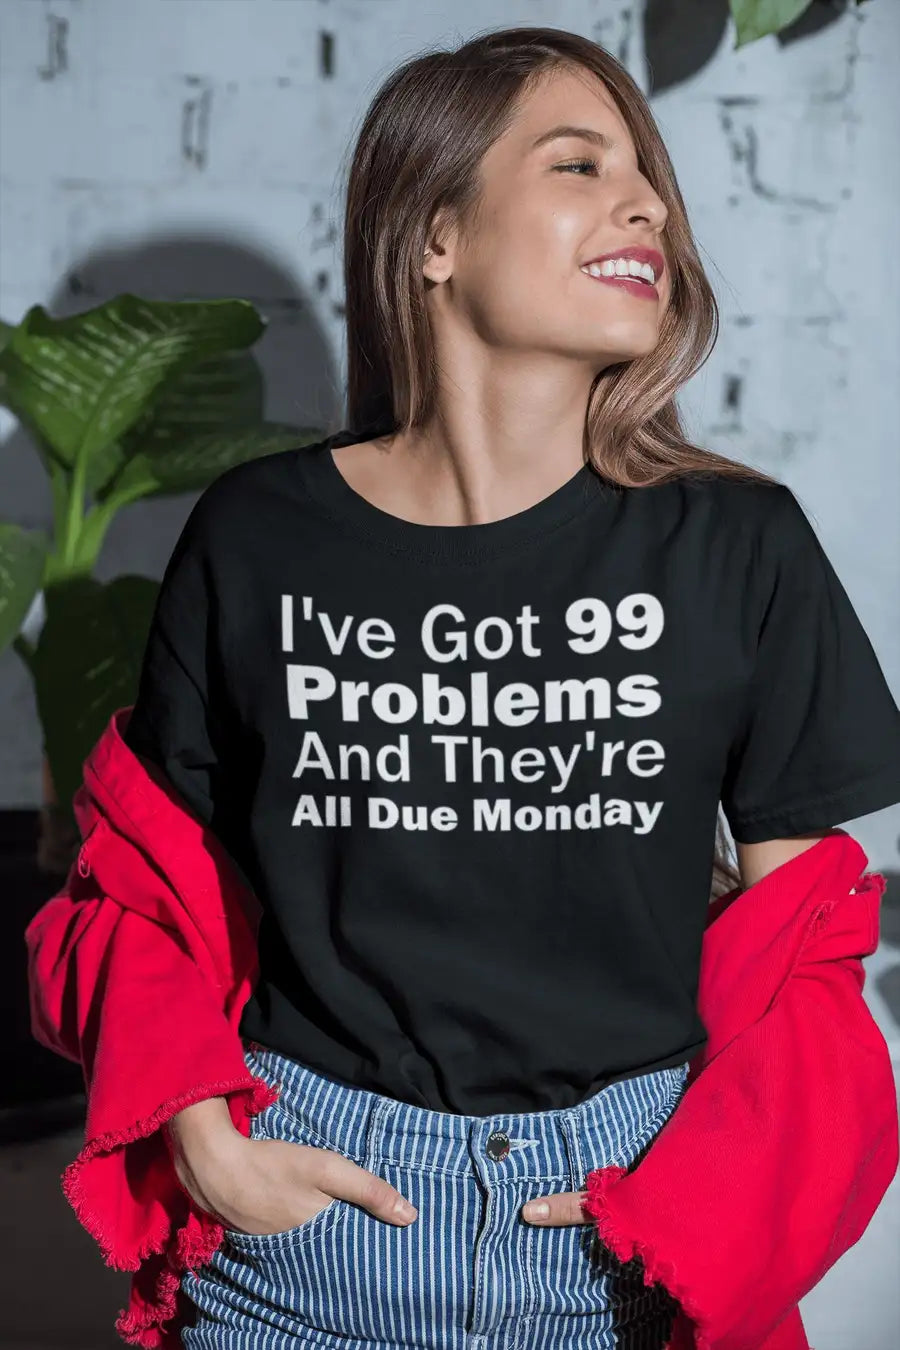 All Problems Due on Monday T Shirt for Men and Women | Premium Design | Catch My Drift India - Catch My Drift India Clothing black, clothing, engineer, engineering, funny, general, made in in